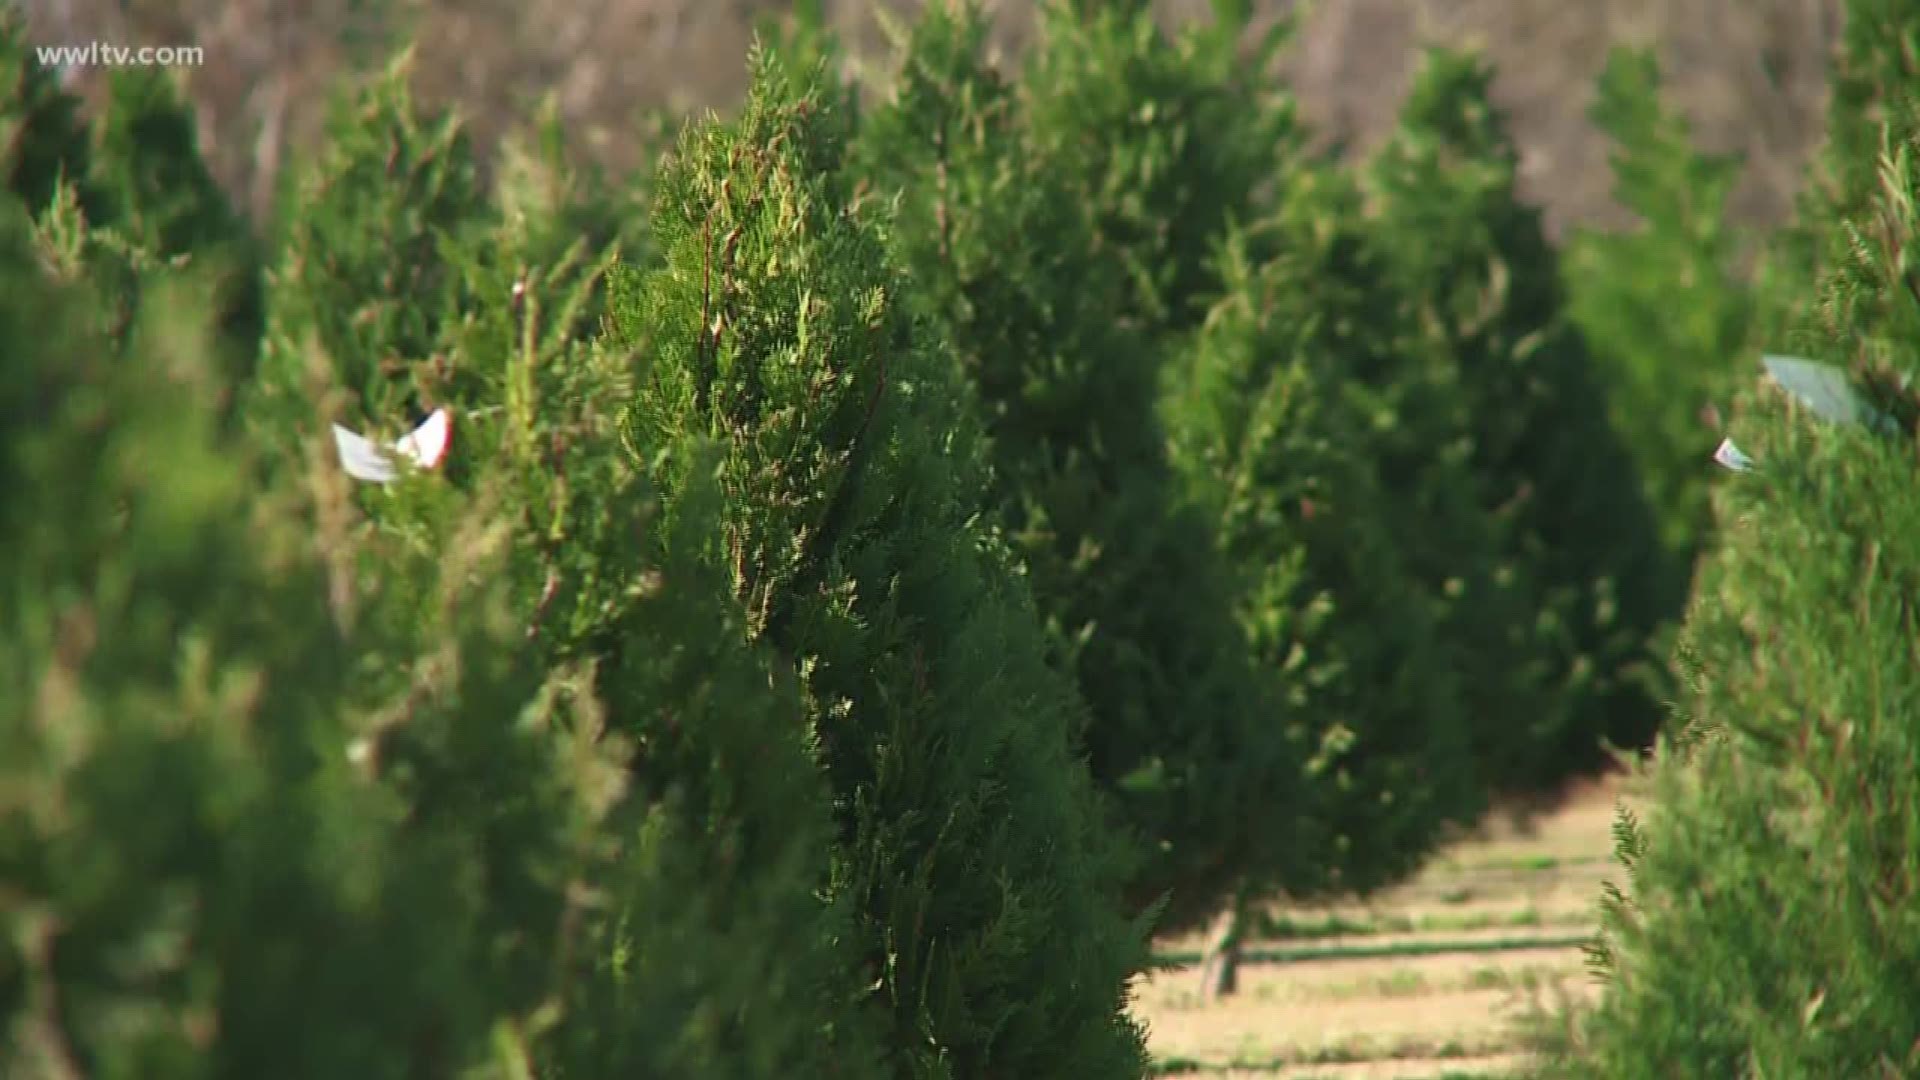 Some people saw they prefer artificial trees over real ones, but how are the tree crops doing locally since some nationally are warning there are fewer.